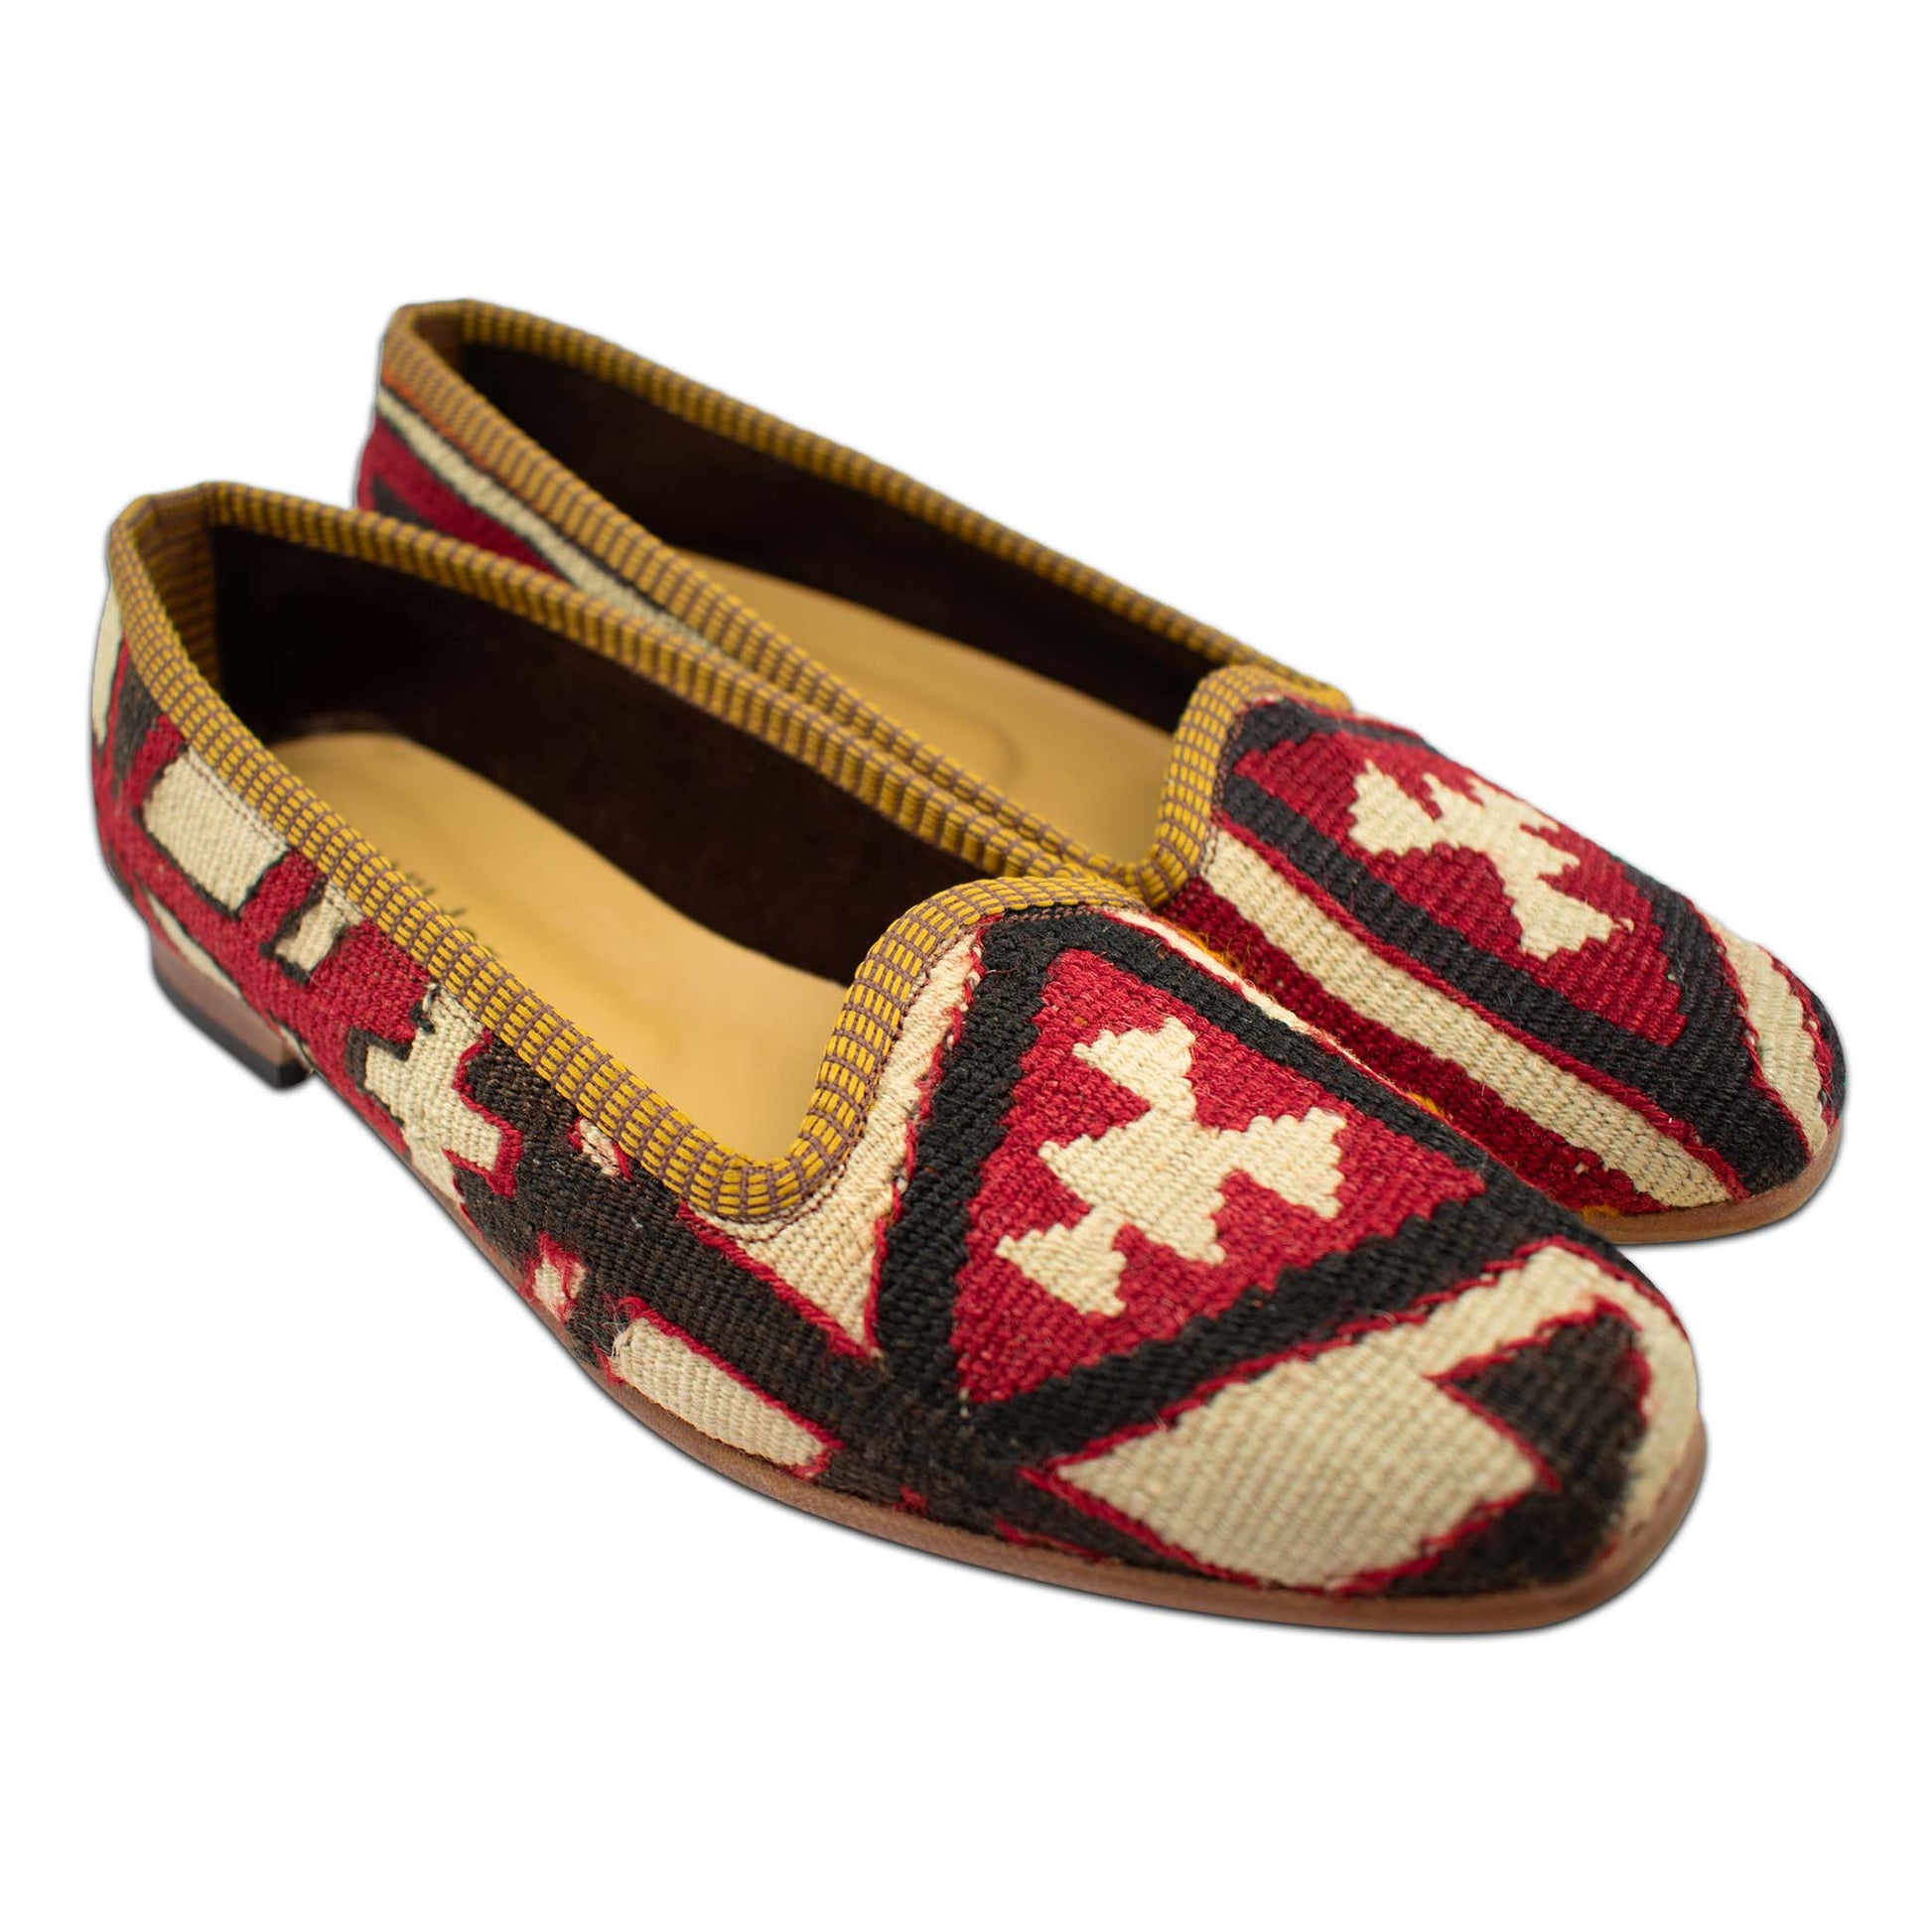 women's size 10 tapestry loafers Turkish